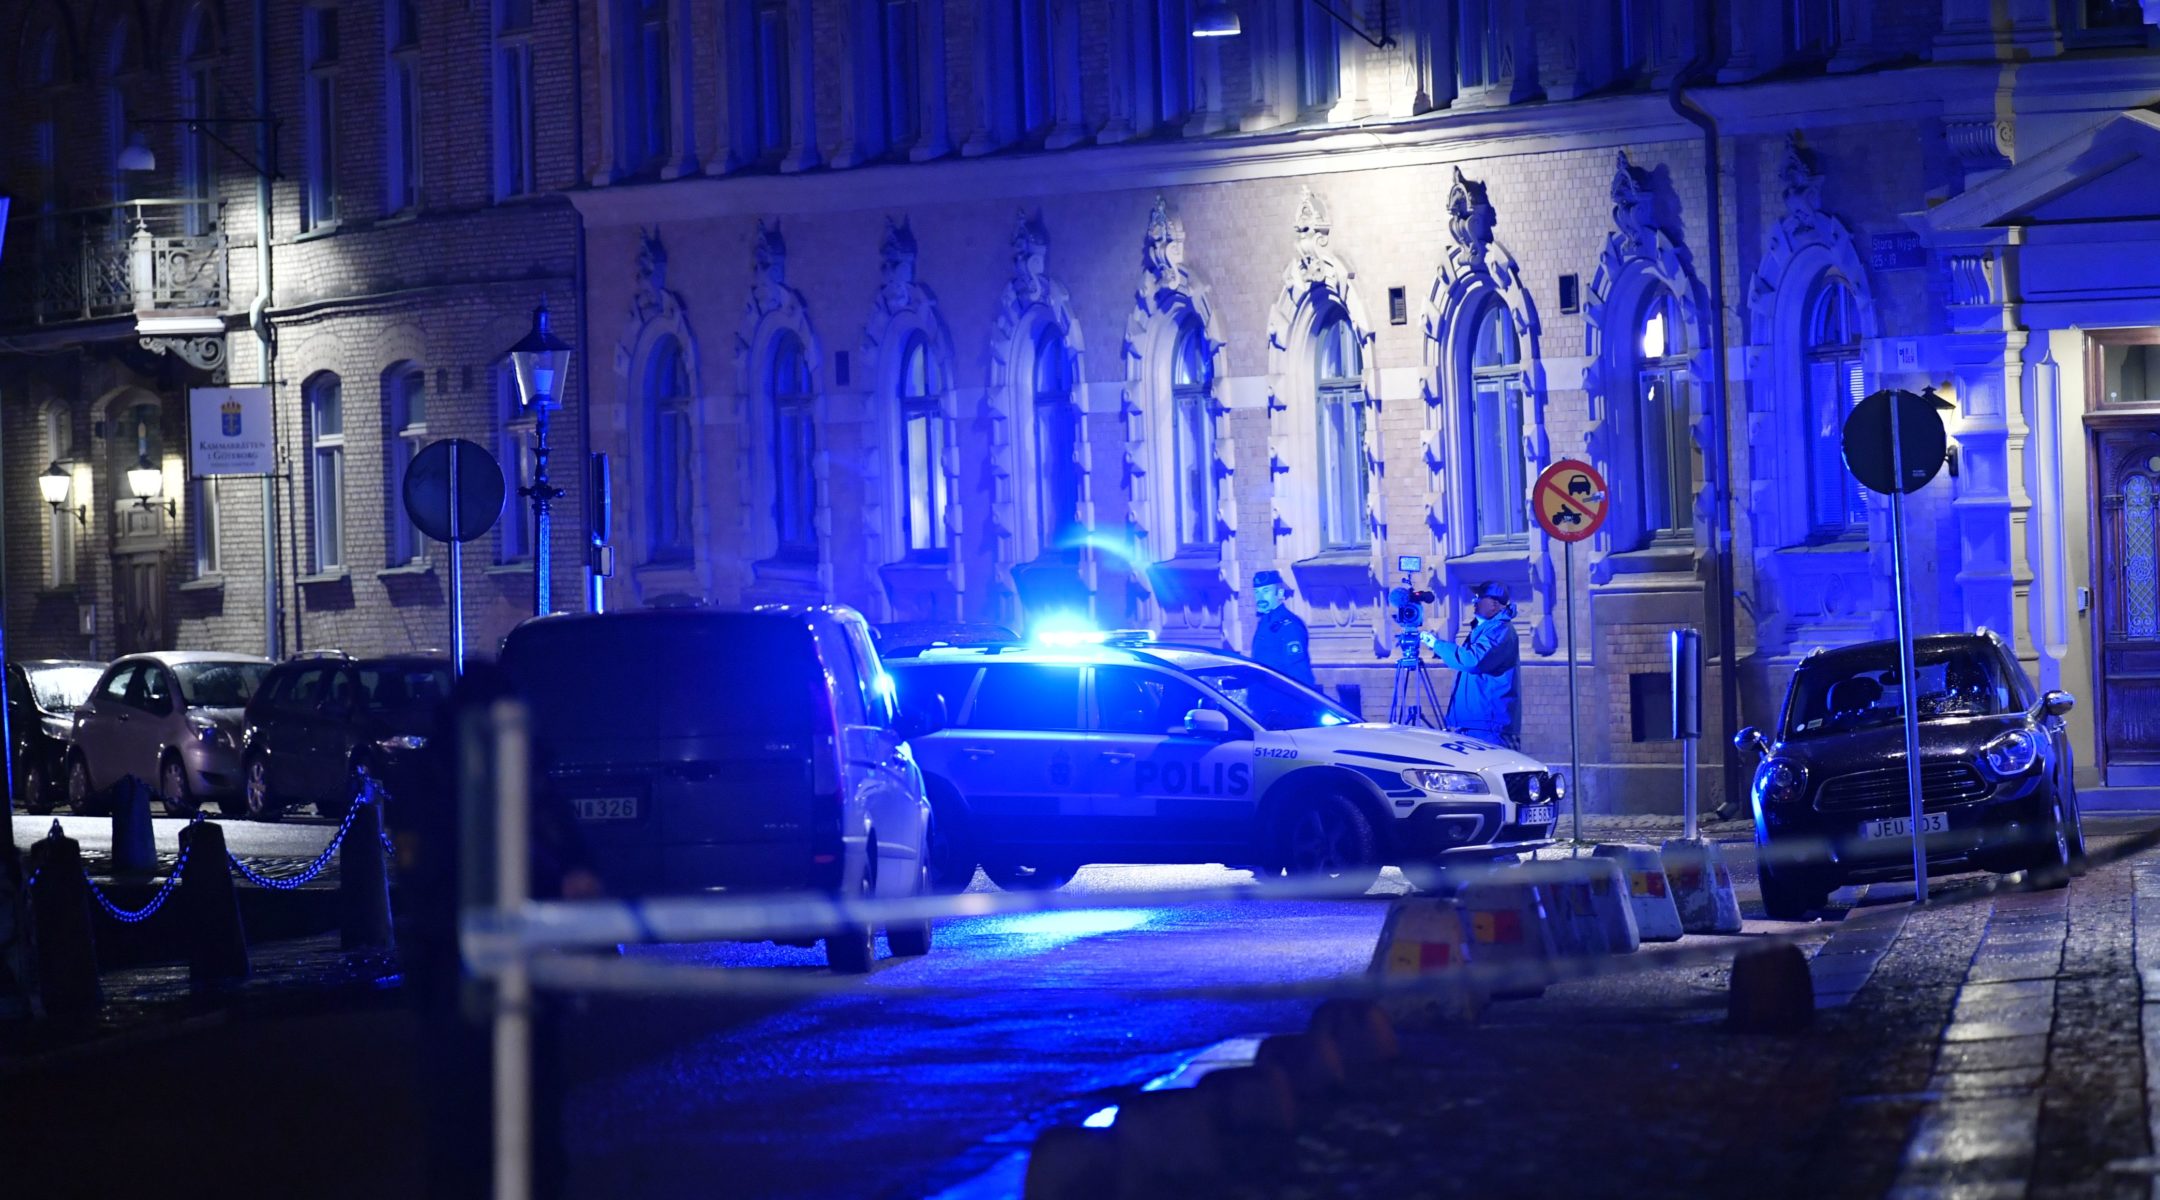 Police arrive after a synagogue was attacked in Gothenburg, Sweden, late Dec. 9, 2017. (Adam Ihse/AFP/Getty Images)